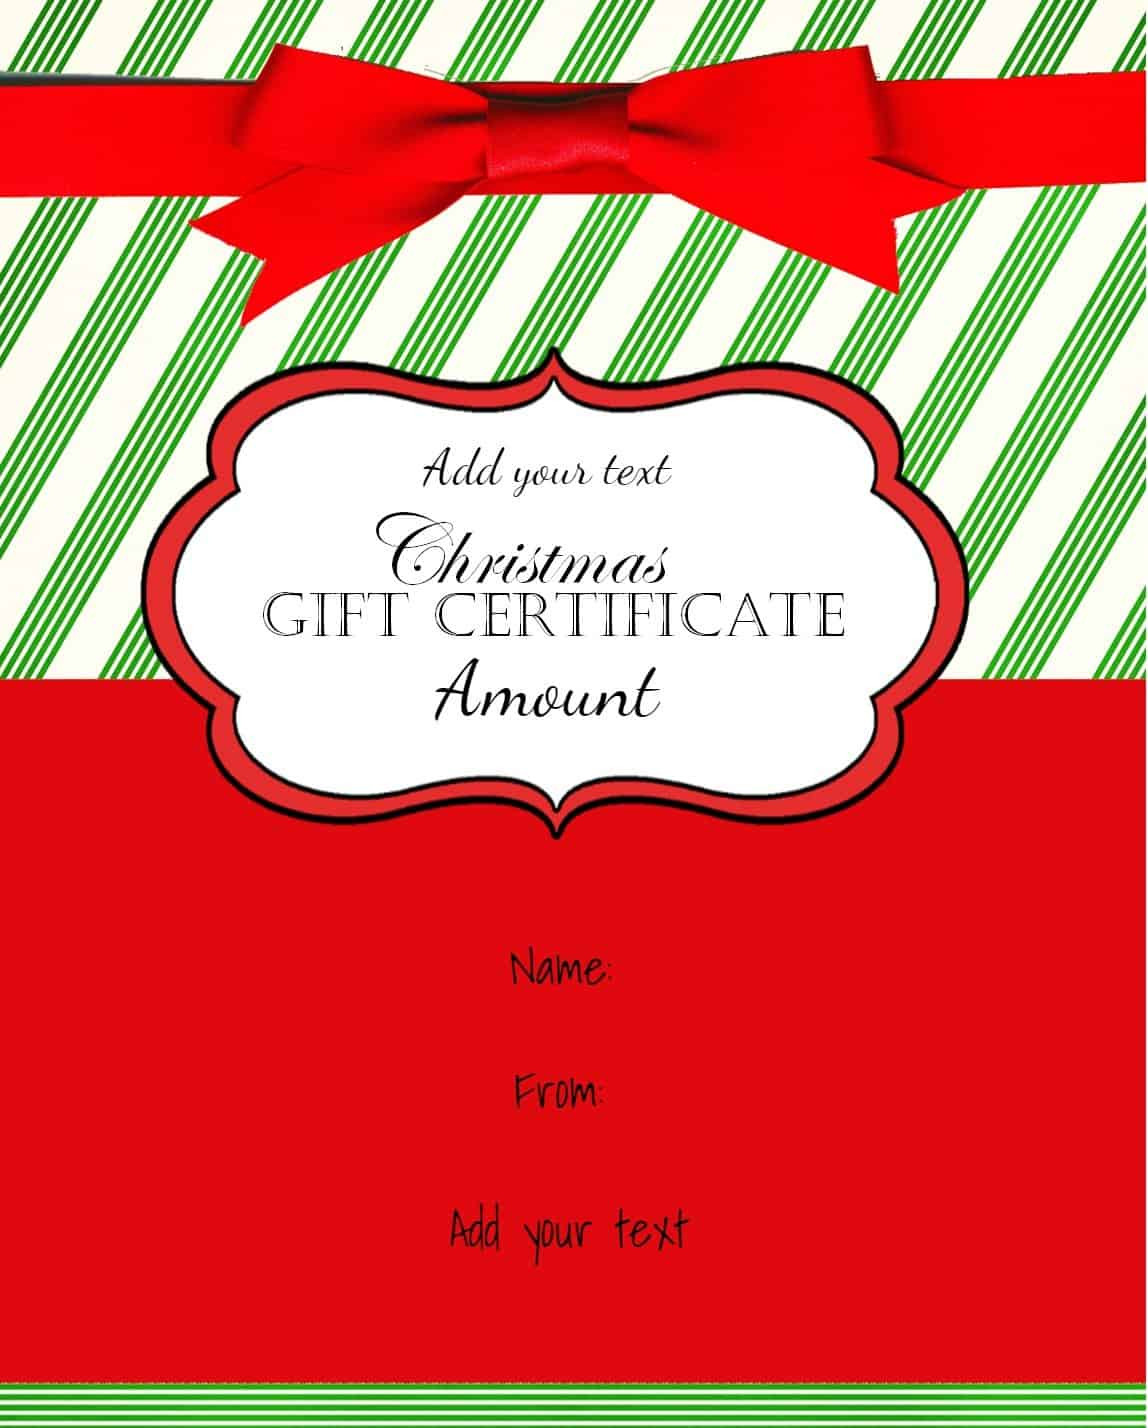 Christmas Gift Certificate Ideas
 Free Christmas Gift Certificate Template